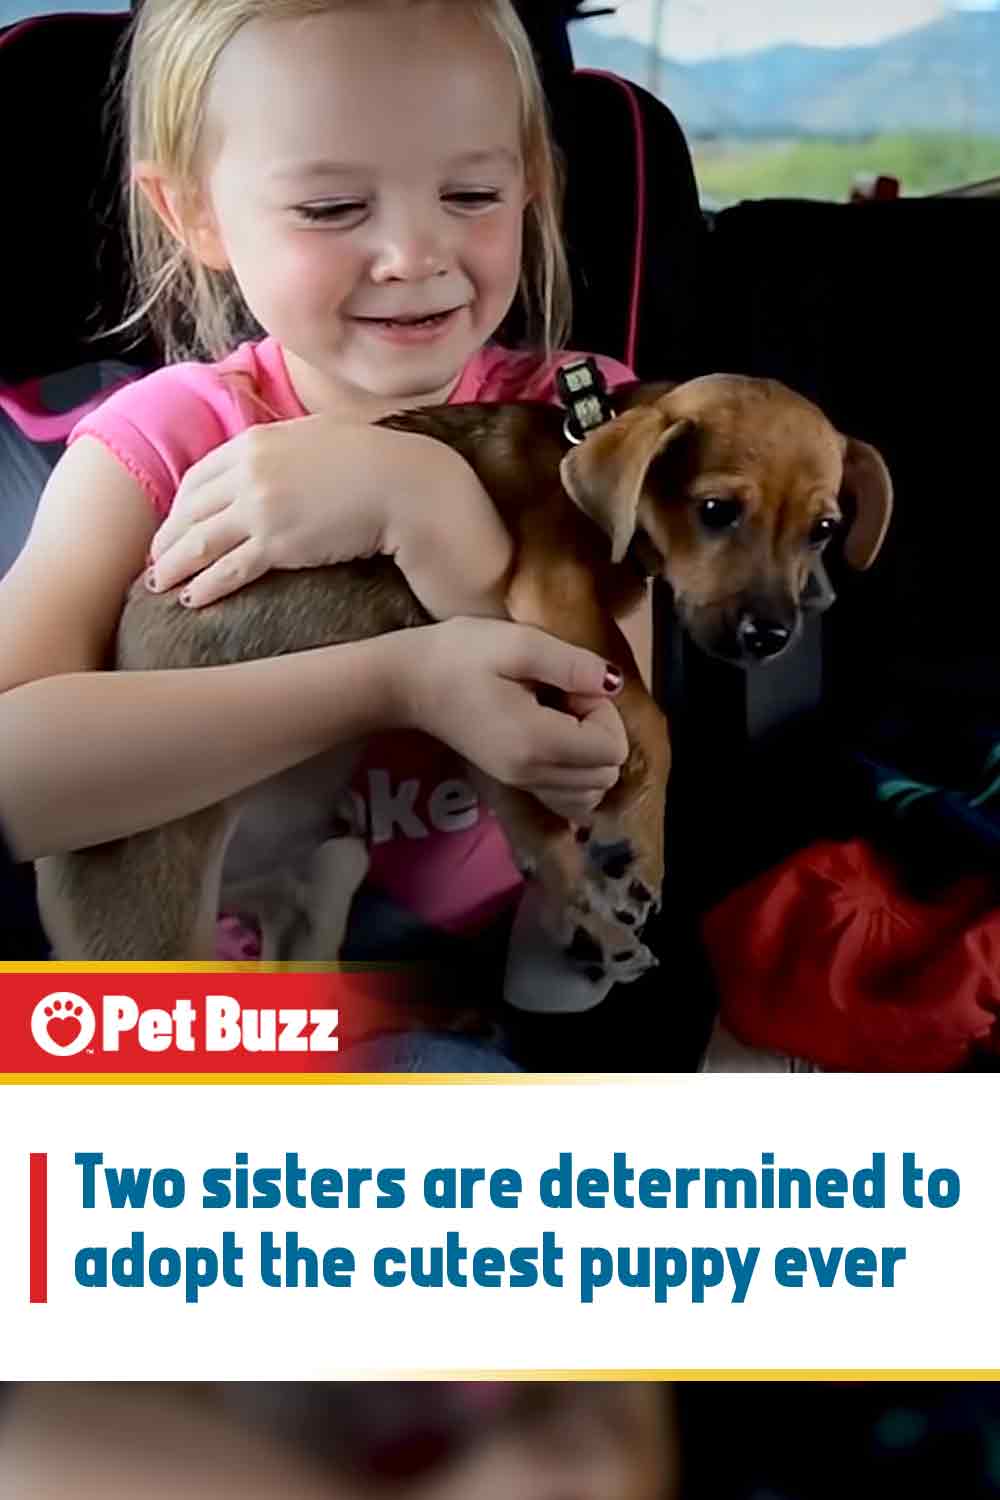 Two sisters are determined to adopt the cutest puppy ever